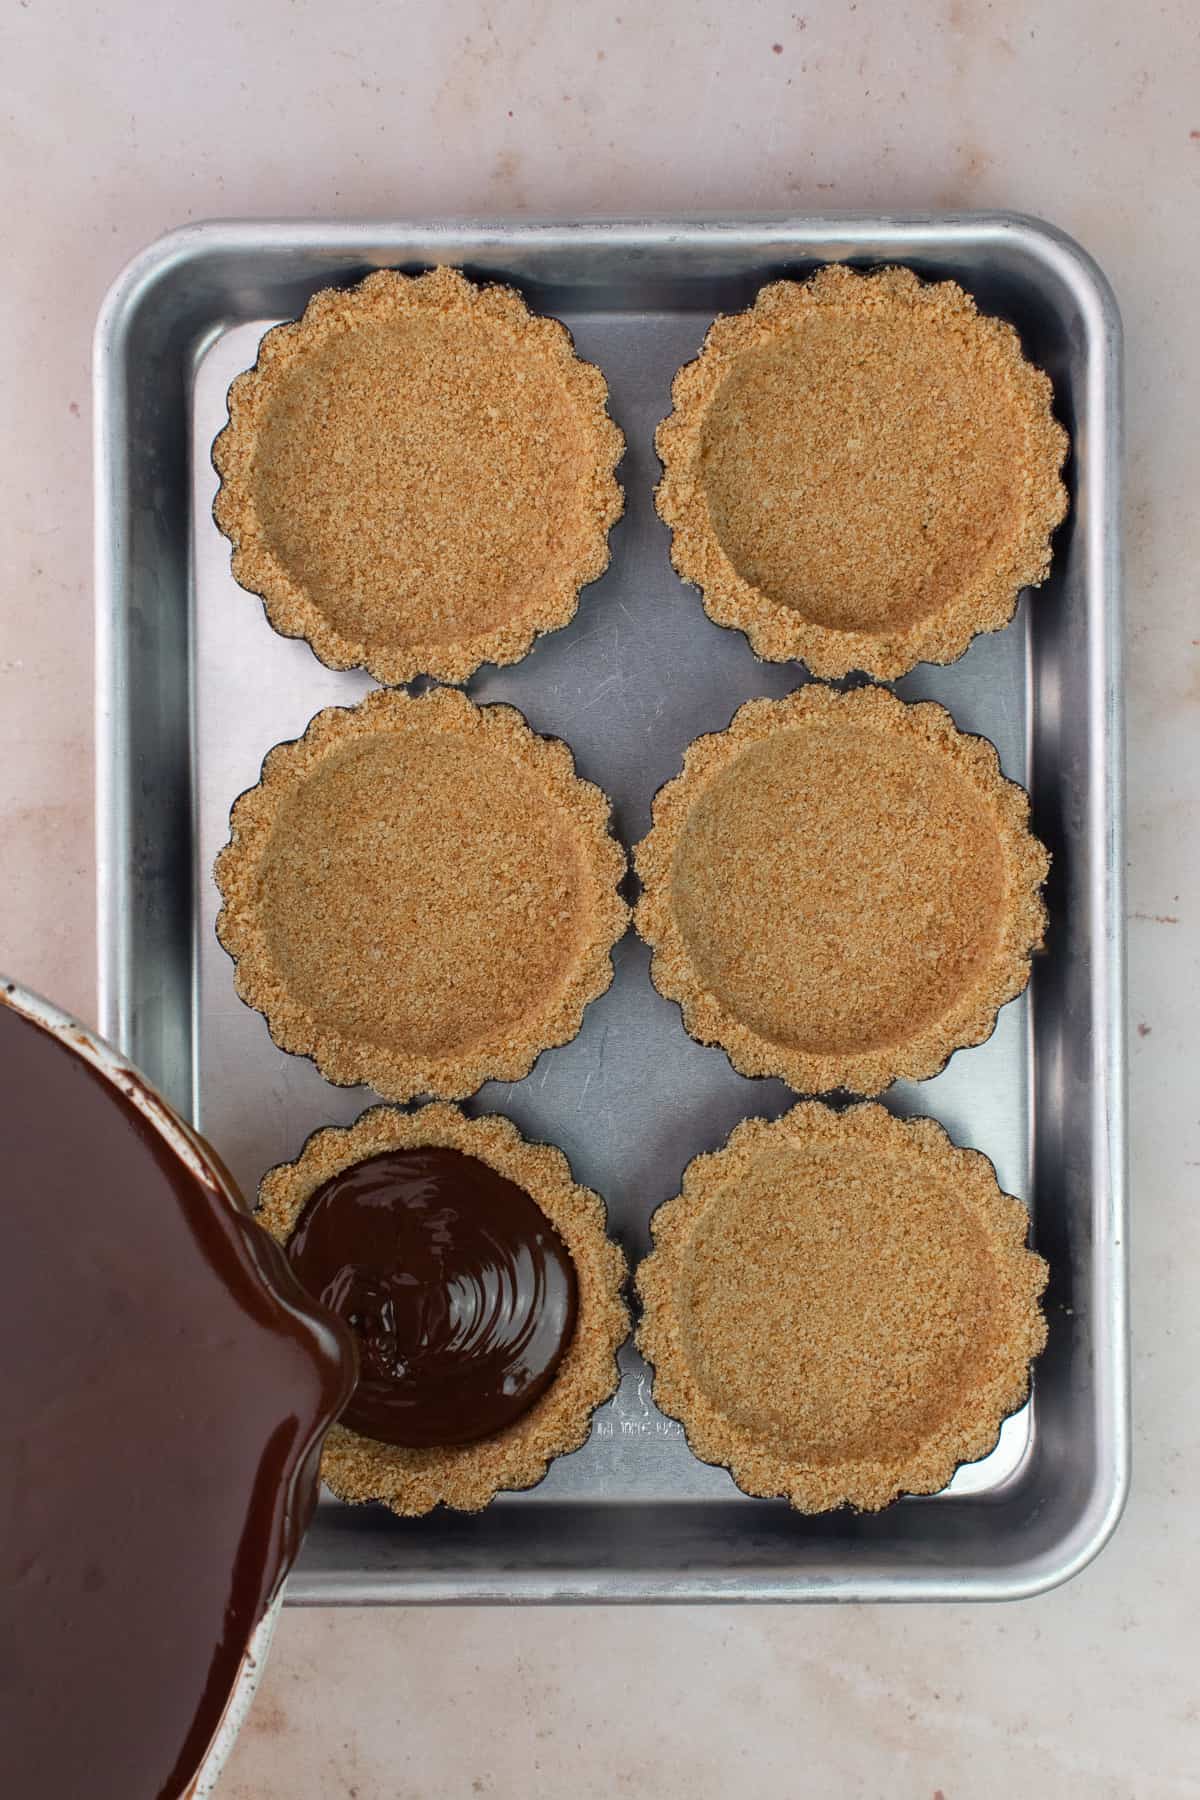 Chocolate filling is poured into mini tart shells